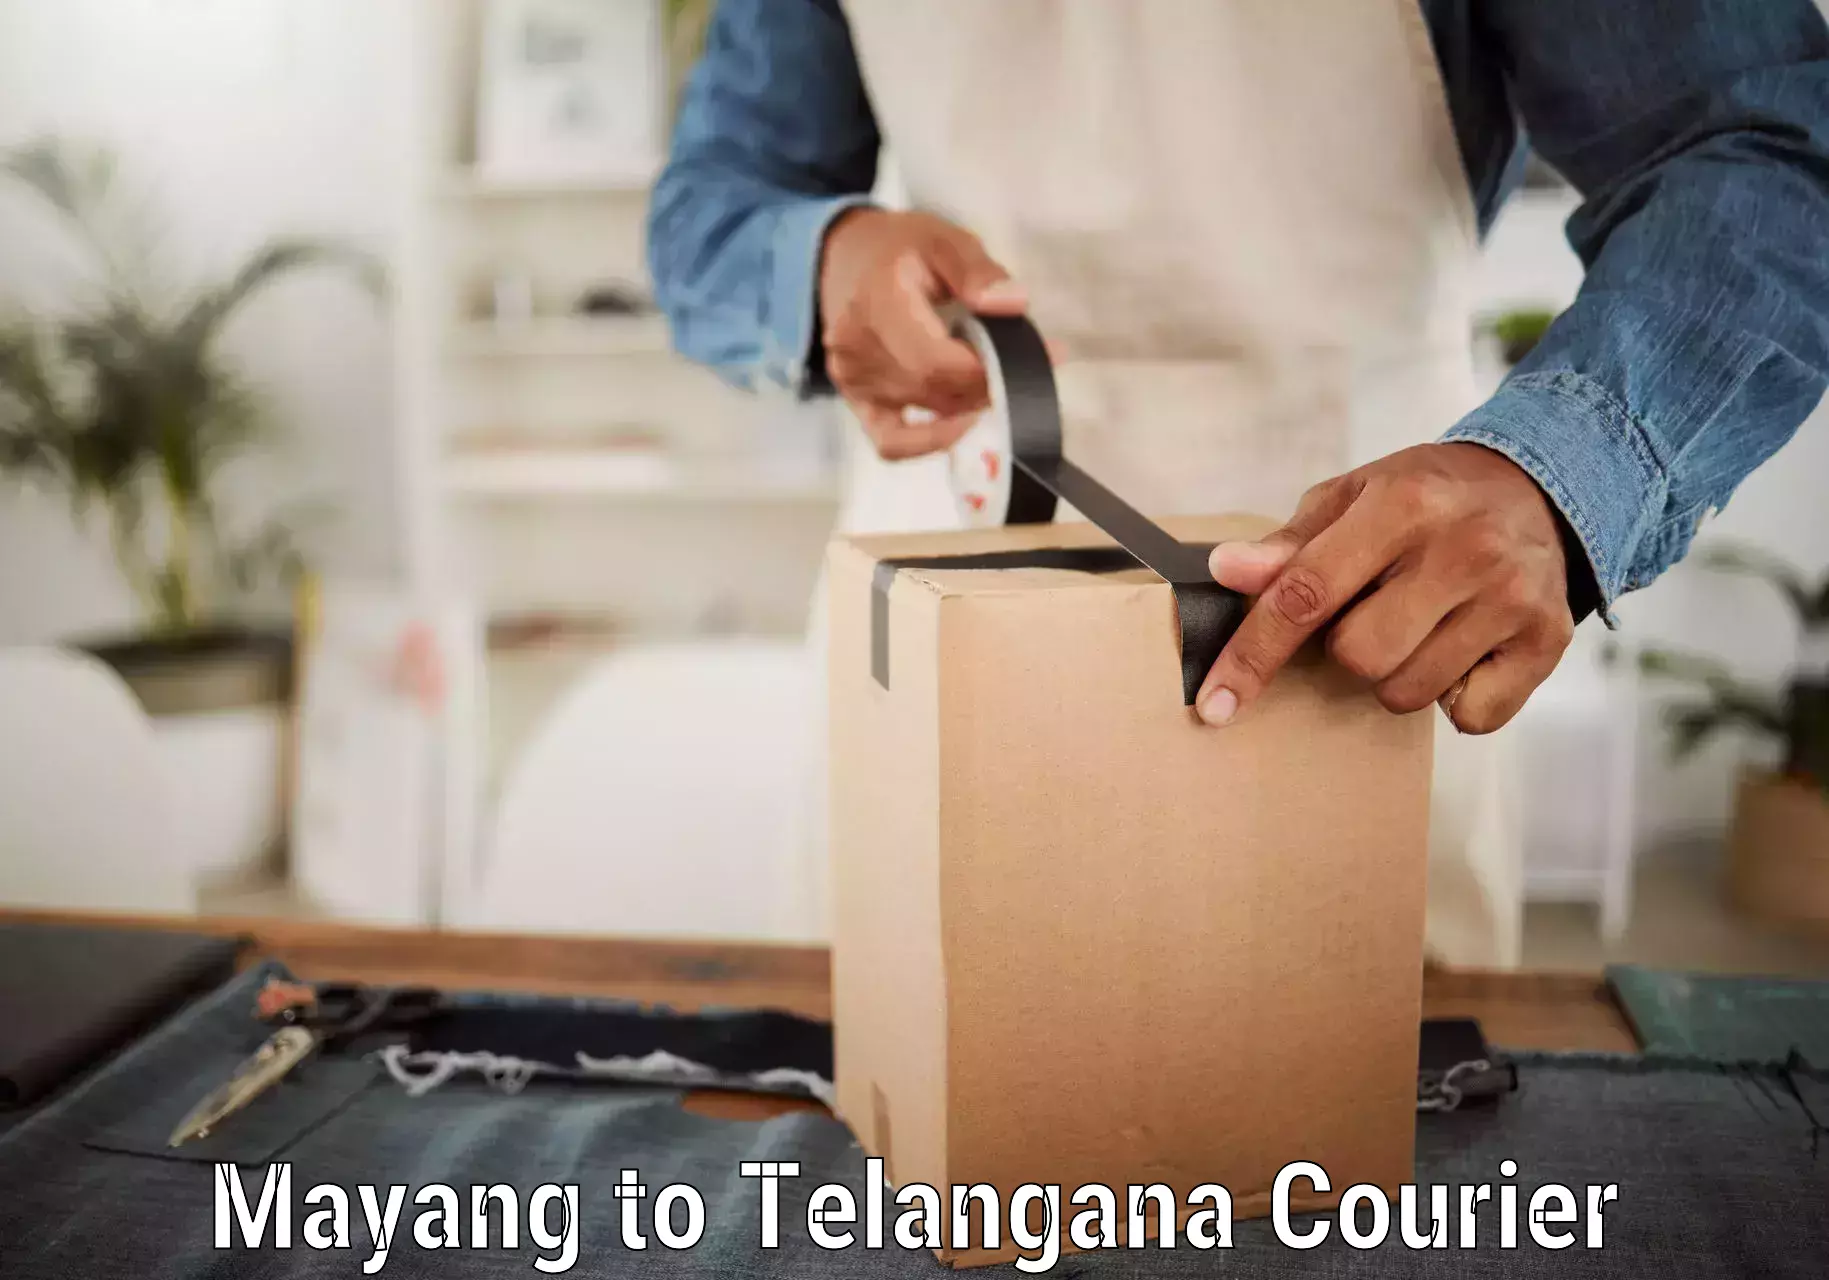 24-hour courier service Mayang to Telangana